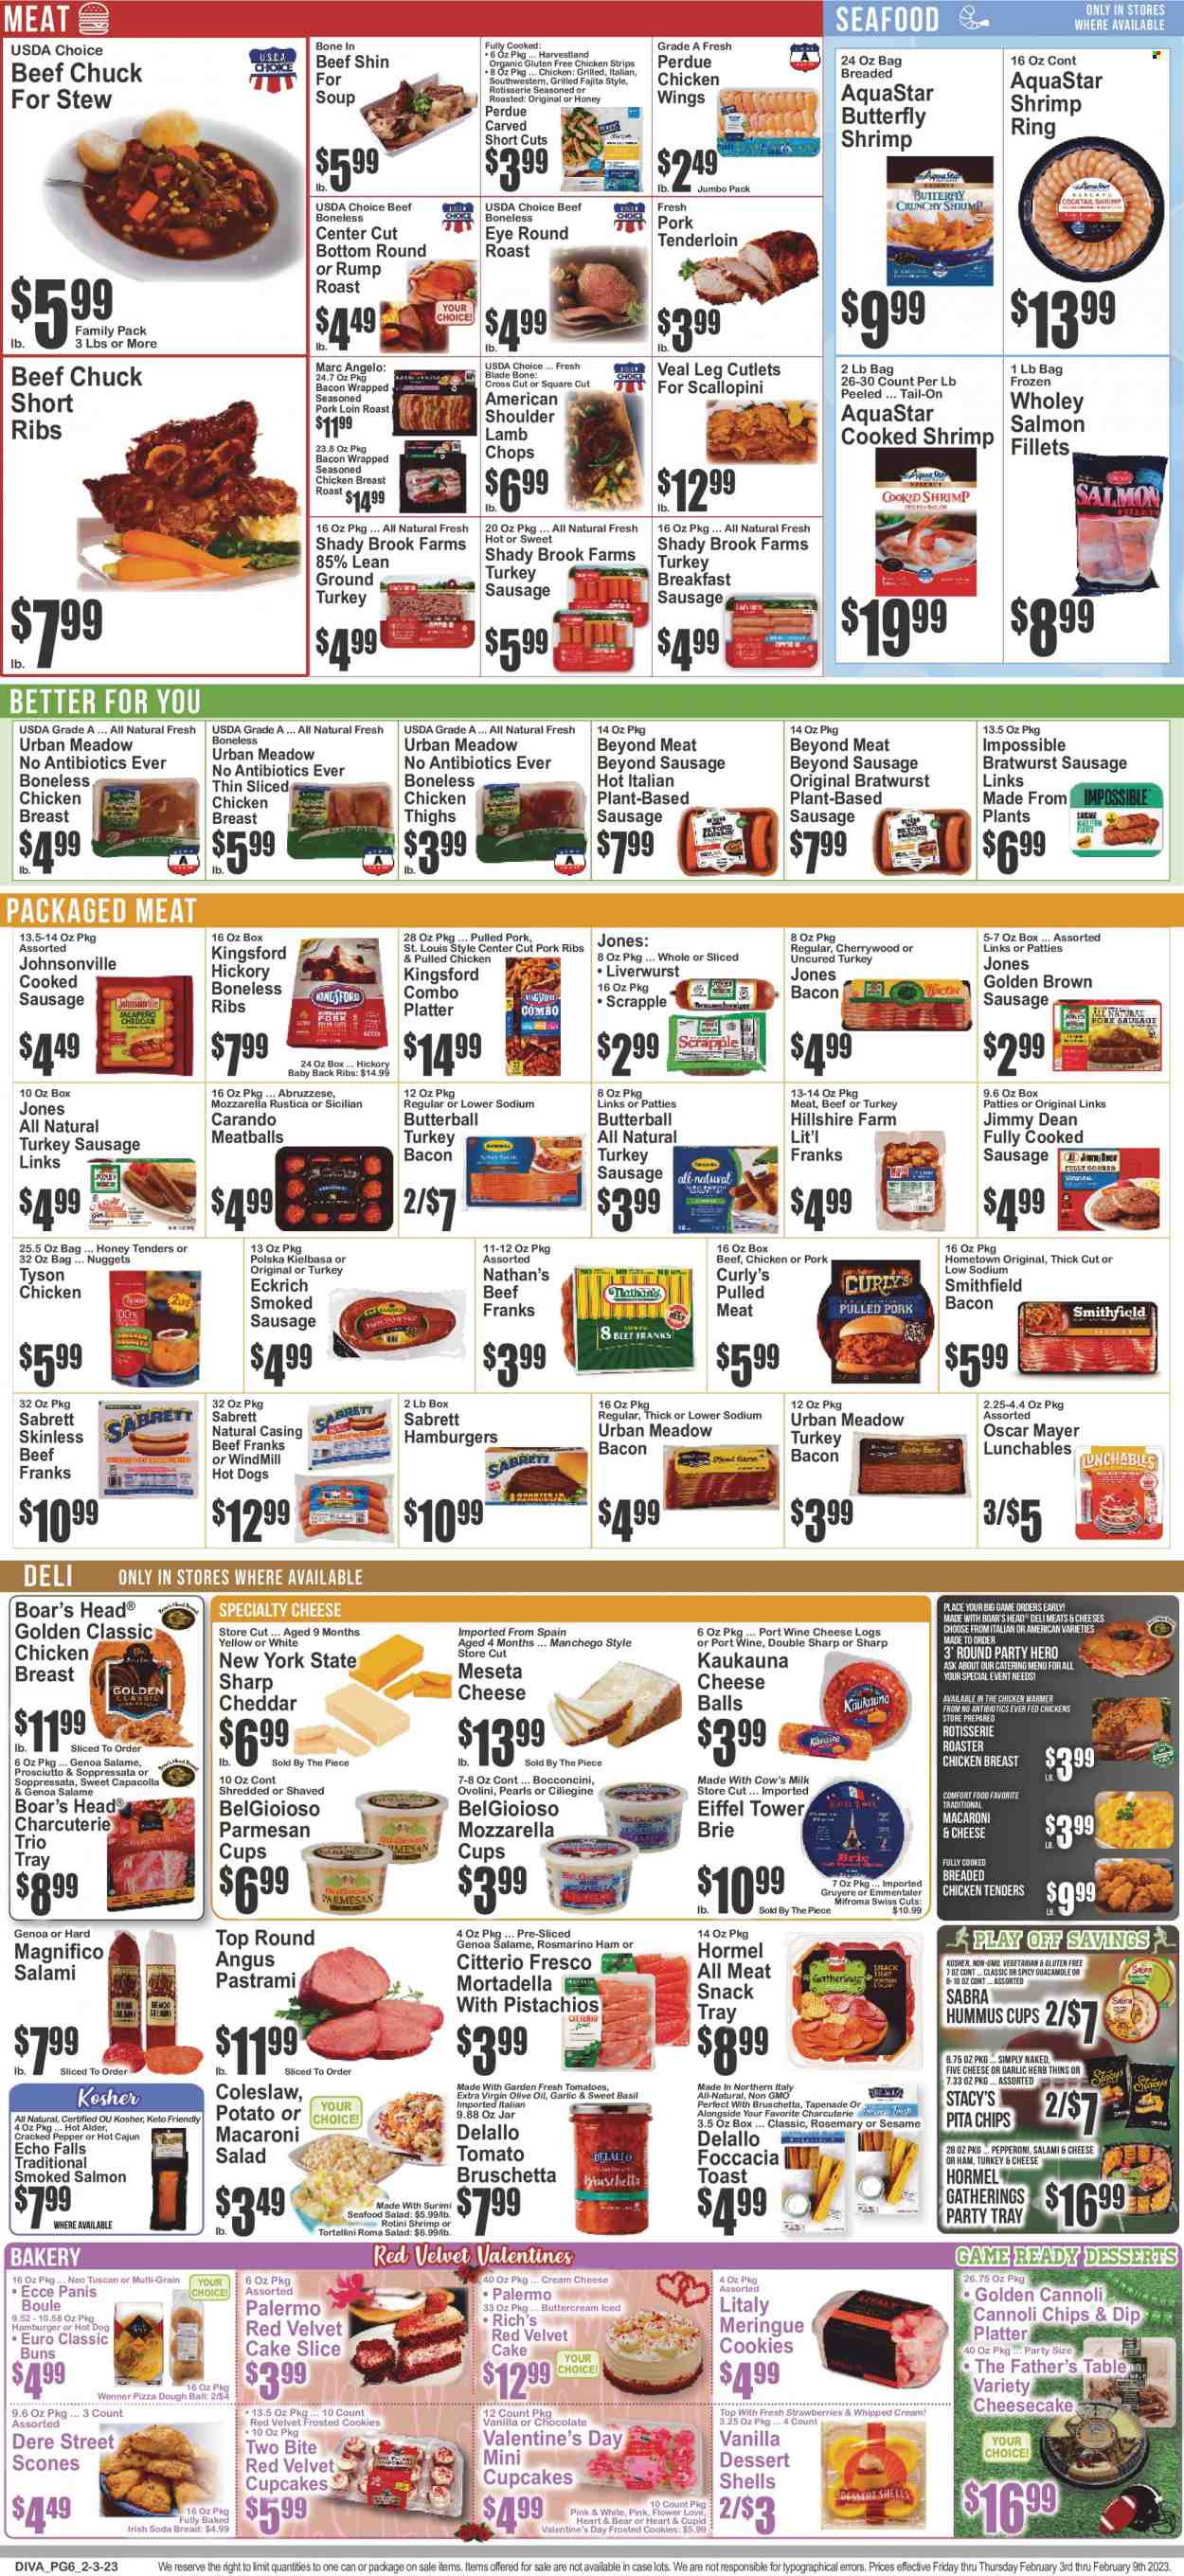 thumbnail - Key Food Flyer - 02/03/2023 - 02/09/2023 - Sales products - bread, cake, buns, soda bread, Father's Table, cupcake, cheesecake, dessert shells, salad, salmon, smoked salmon, seafood, shrimps, coleslaw, macaroni & cheese, hot dog, meatballs, soup, nuggets, hamburger, tortellini, fajita, Perdue®, Lunchables, pulled pork, pulled chicken, Jimmy Dean, Hormel, Kingsford, bruschetta, bacon, Butterball, mortadella, salami, soppressata, turkey bacon, Hillshire Farm, prosciutto, pastrami, Johnsonville, Oscar Mayer, bratwurst, sausage, smoked sausage, pepperoni, kielbasa, hummus, guacamole, macaroni salad, seafood salad, bocconcini, cream cheese, Gruyere, Manchego, parmesan, brie, milk, whipped cream, dip, pizza dough, chicken wings, strips, chicken strips, cookies, snack, Thins, pita chips, rosemary, extra virgin olive oil, olive oil, oil, wine, port wine, ground turkey, chicken thighs, beef meat, round roast, ribs, pork loin, pork meat, pork ribs, pork tenderloin, pork back ribs, lamb chops, lamb meat, cup. Page 7.